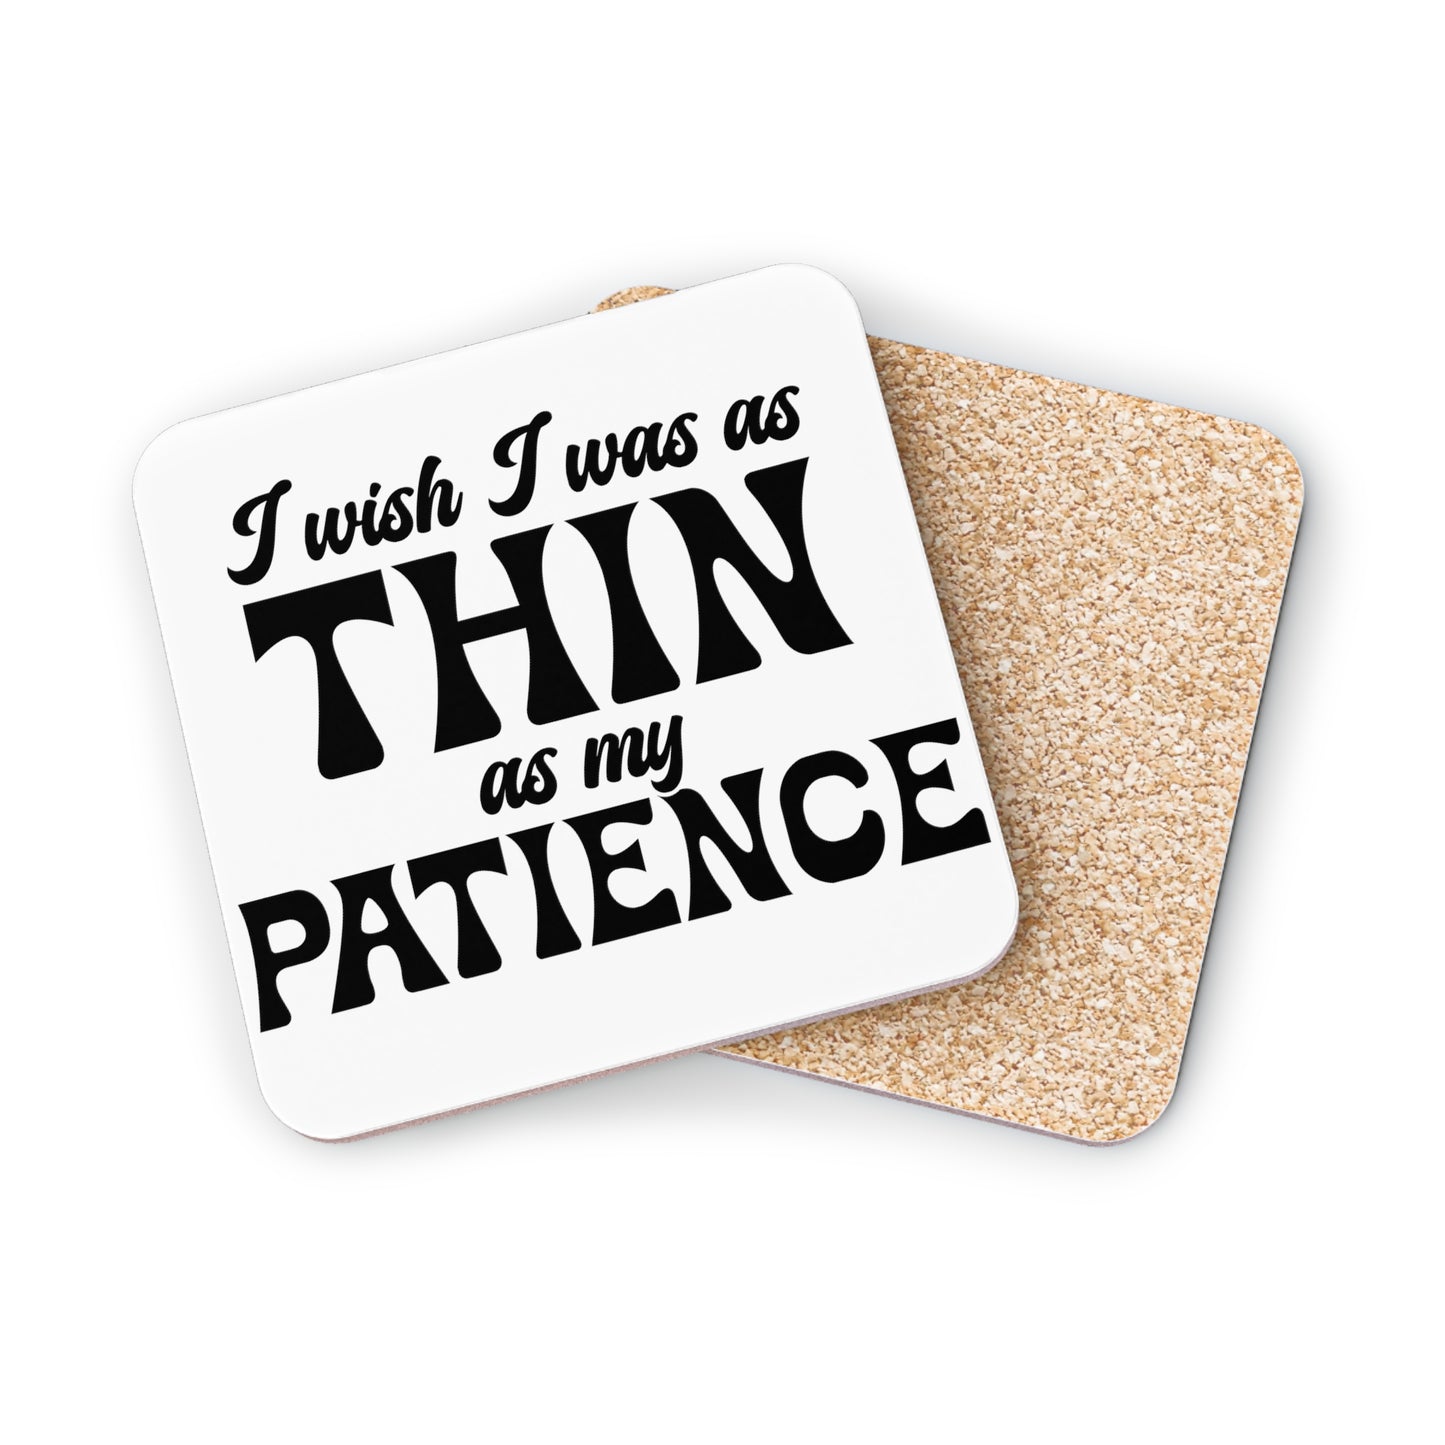 "I Wish I Was As Thin As My Patience" Square Coasters